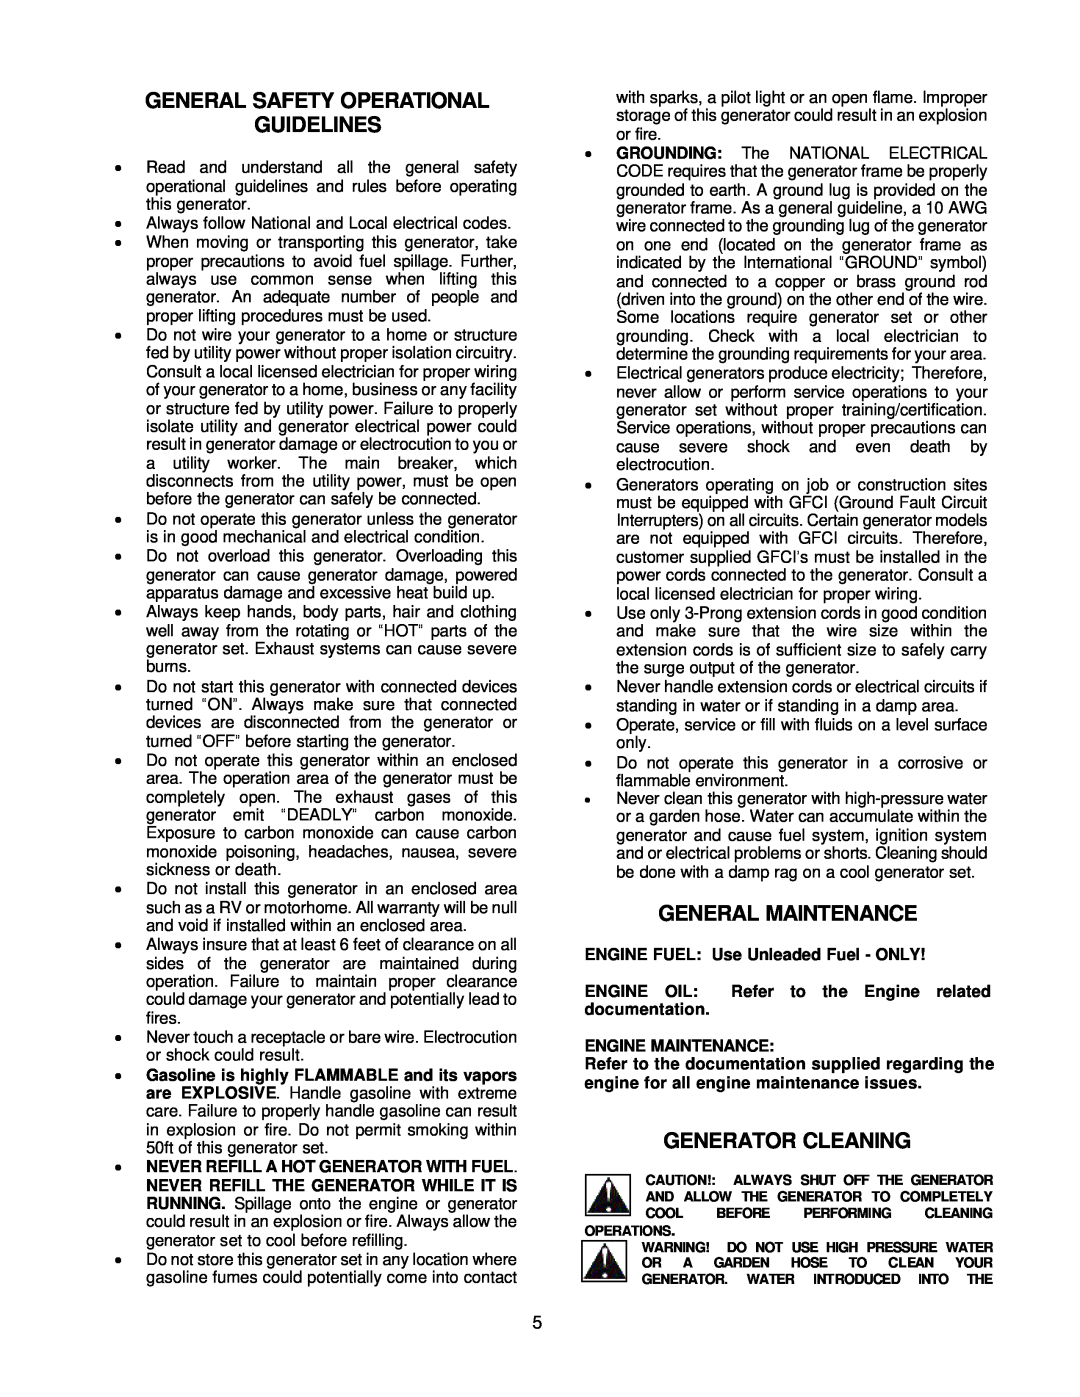 Chicago Electric 39408 General Safety Operational Guidelines, General Maintenance, Generator Cleaning, Engine Maintenance 